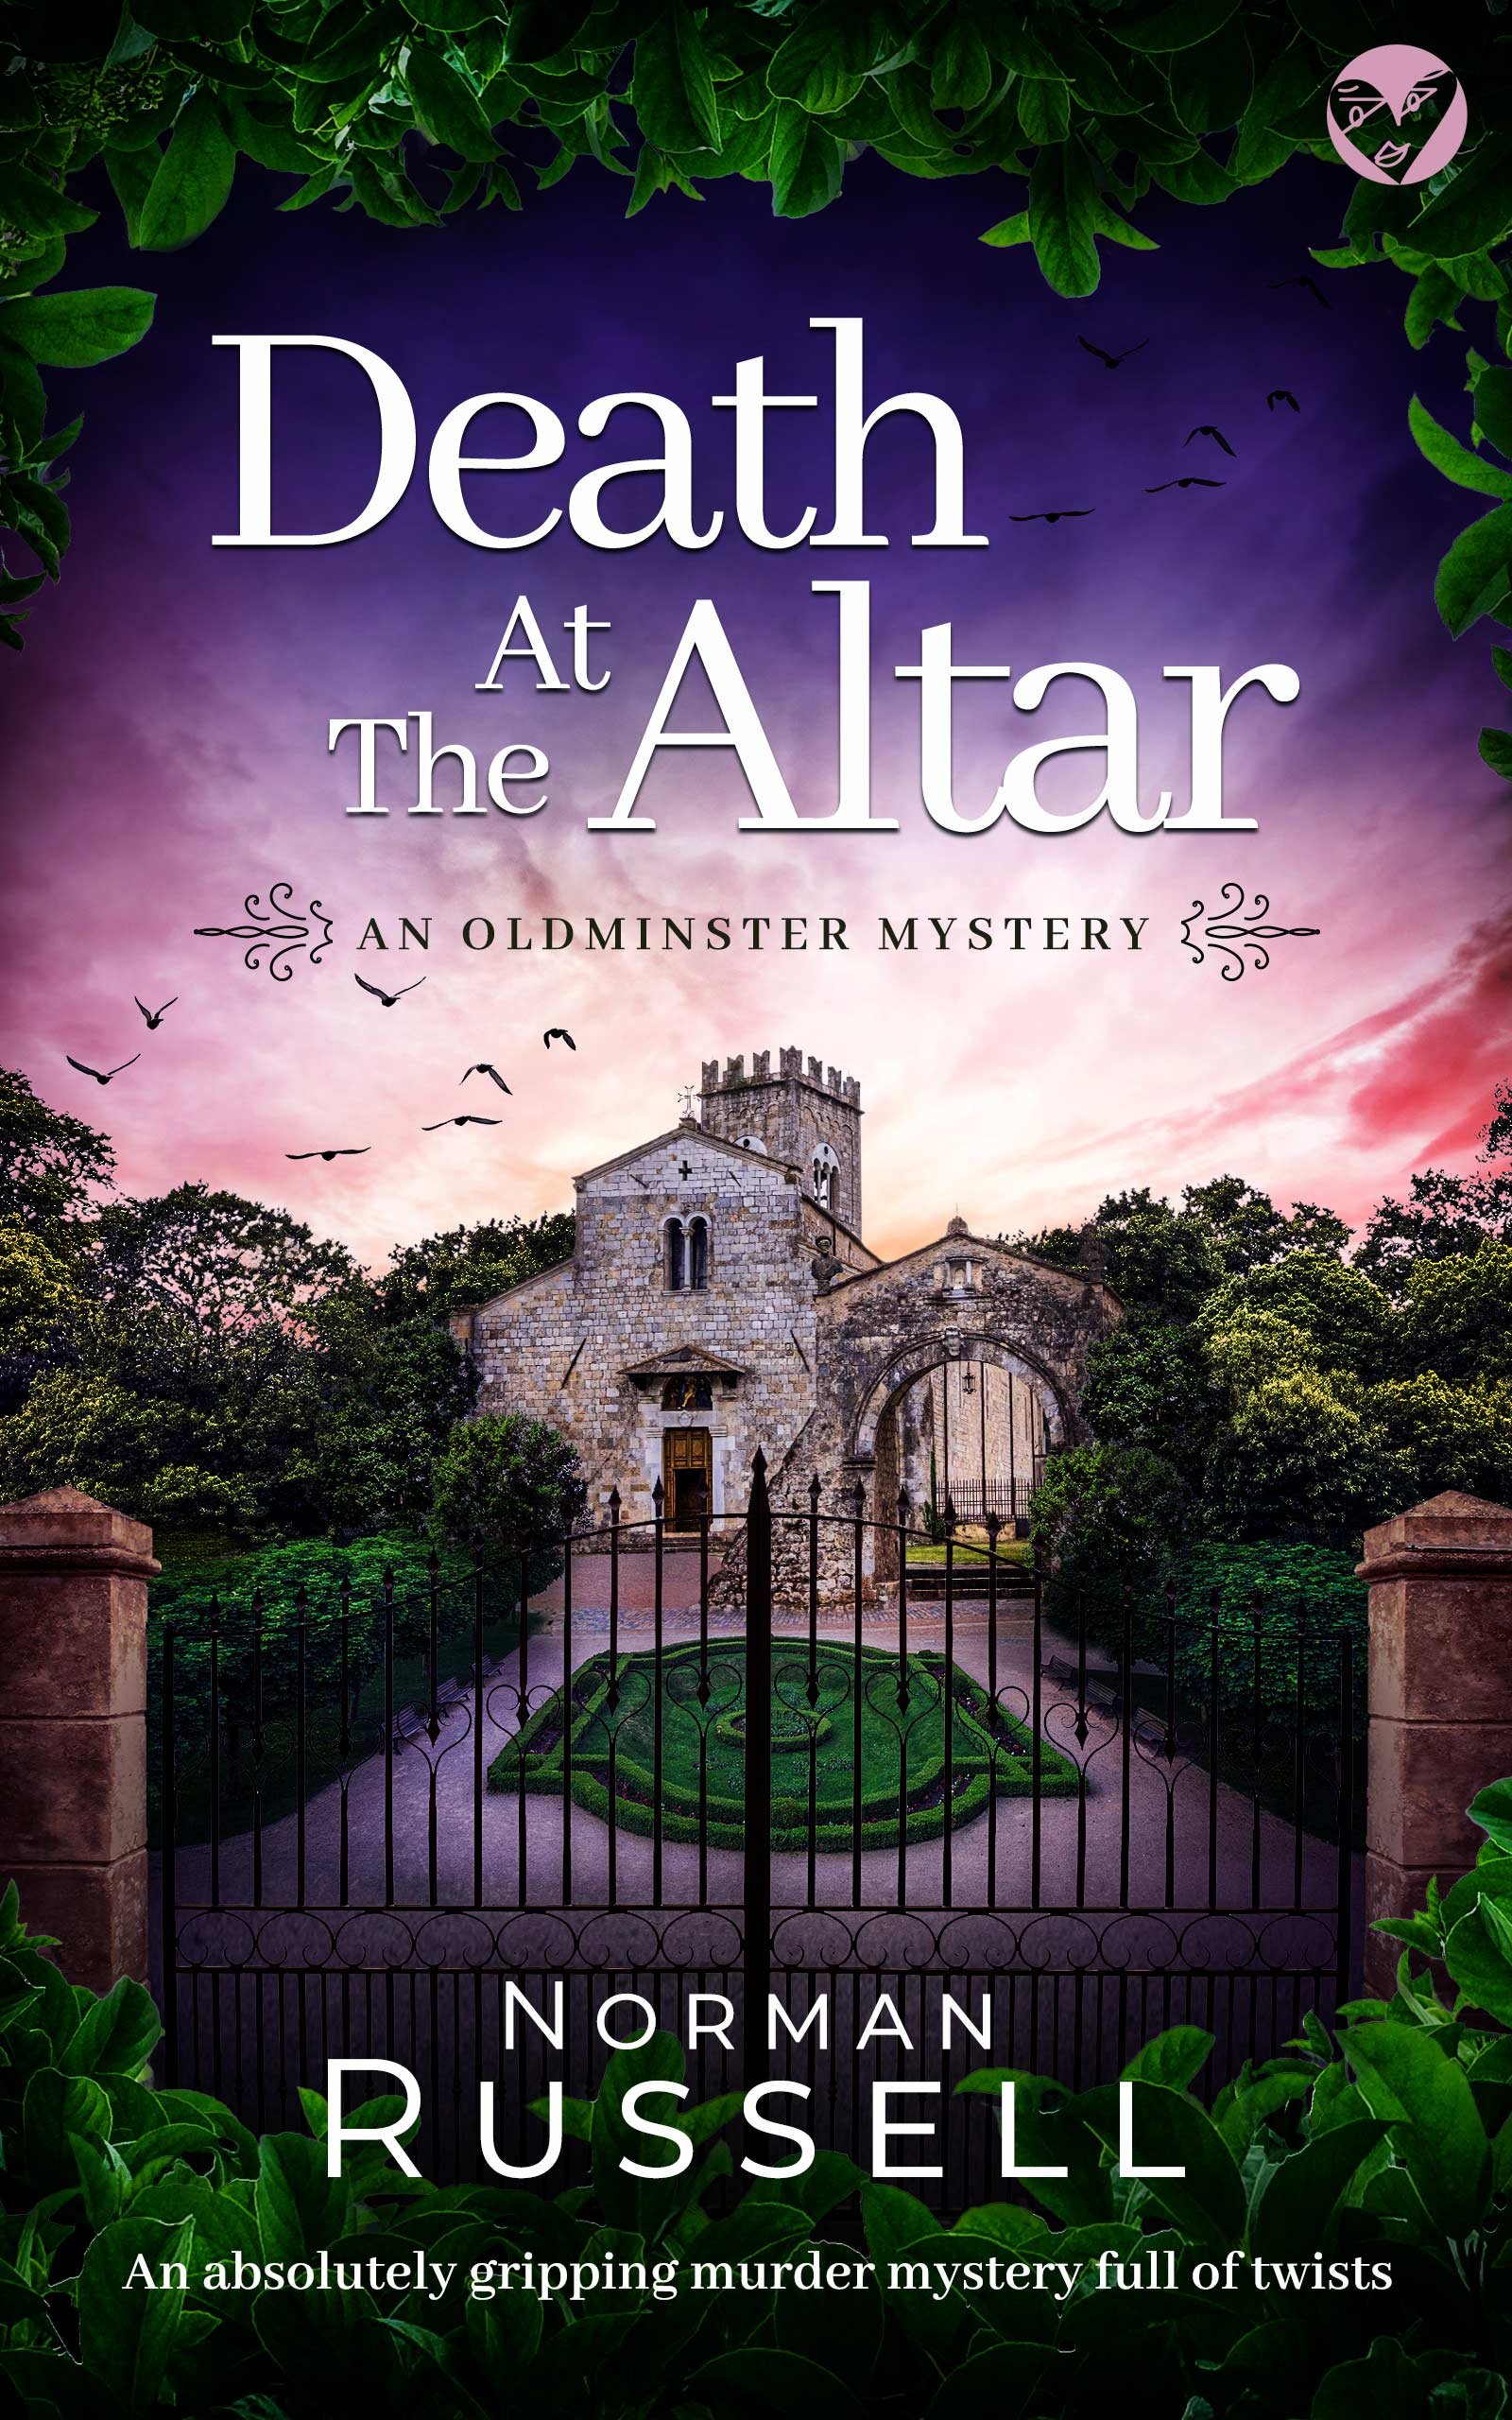 DEATH AT THE ALTAR Cover publish.jpg